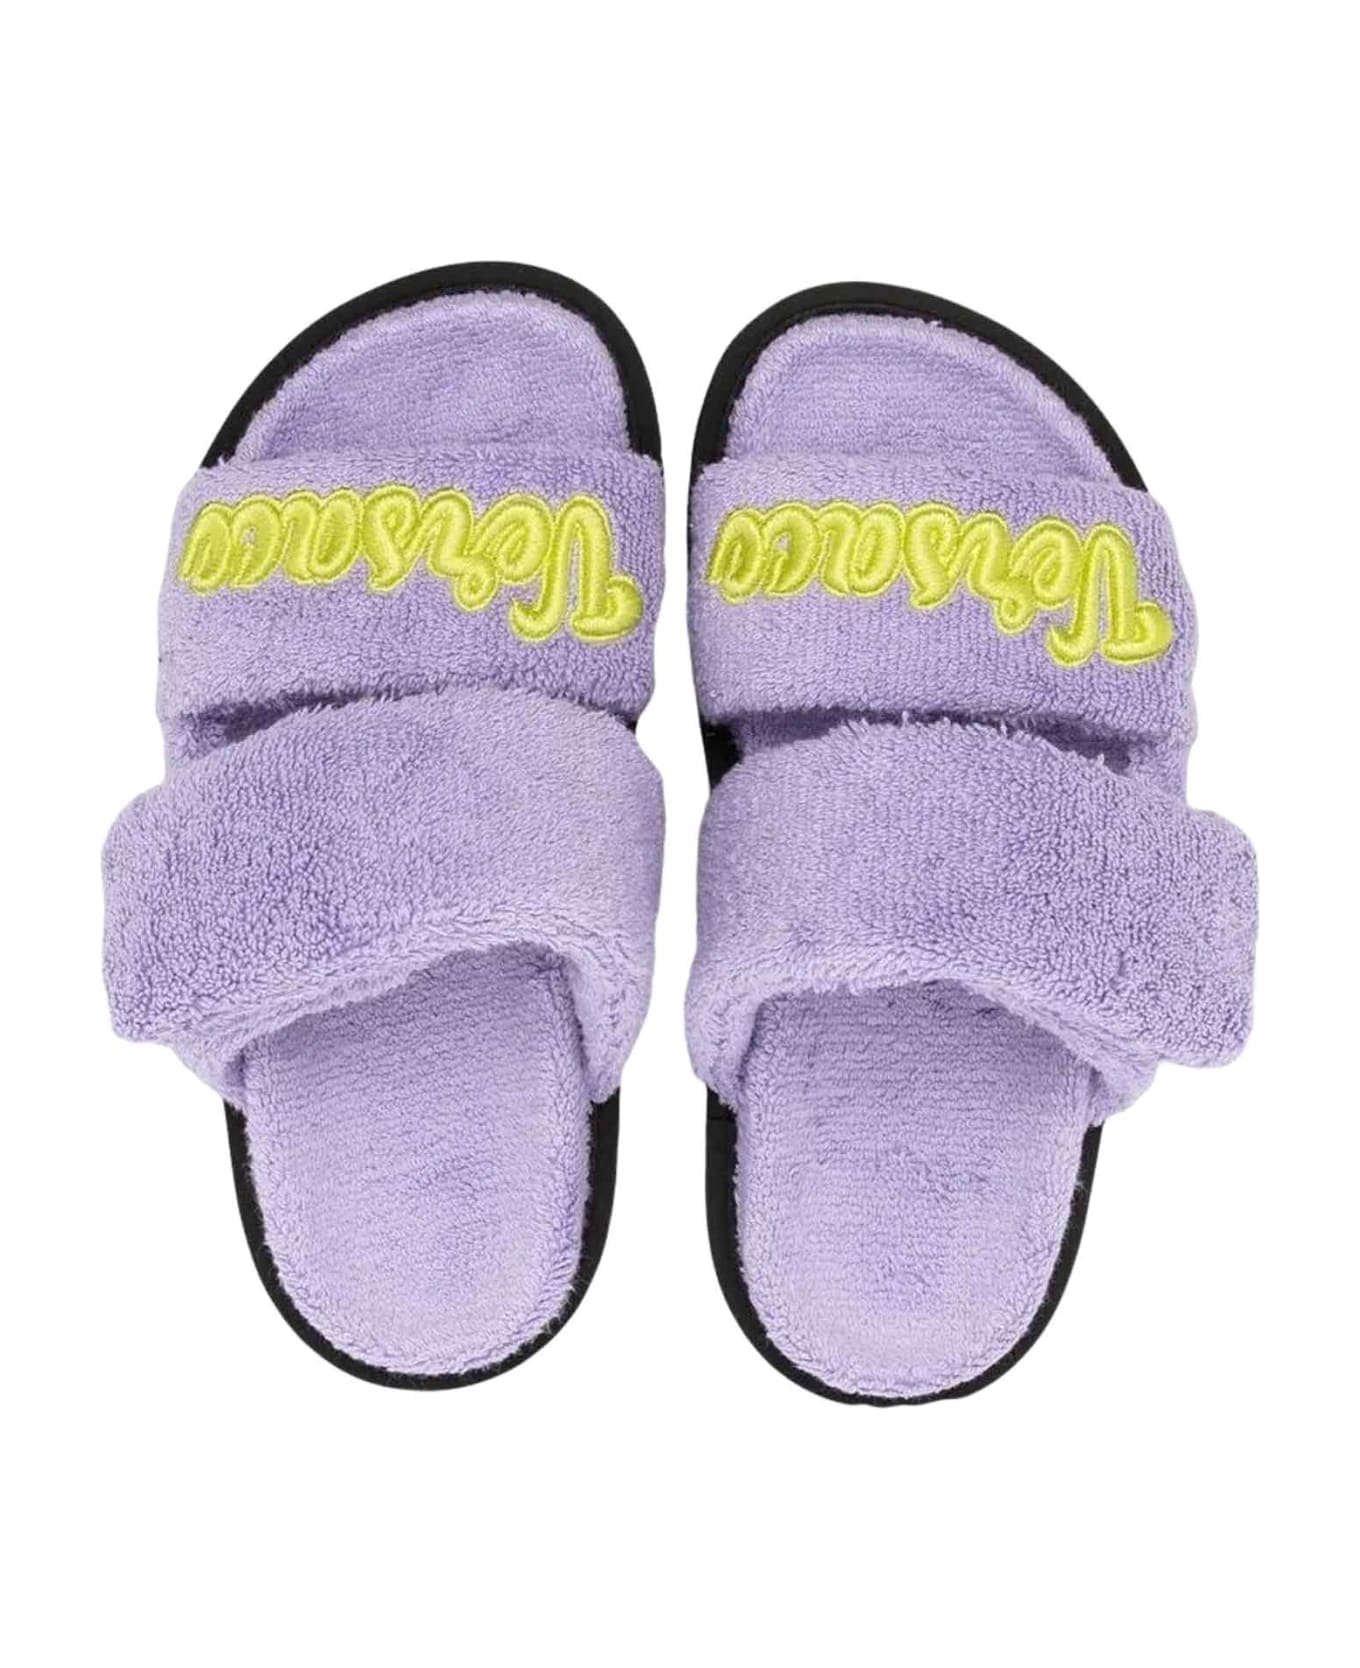 Young Versace Lilac/lime Sandals Unisex Kids - Baby Violet Acid Lime シューズ